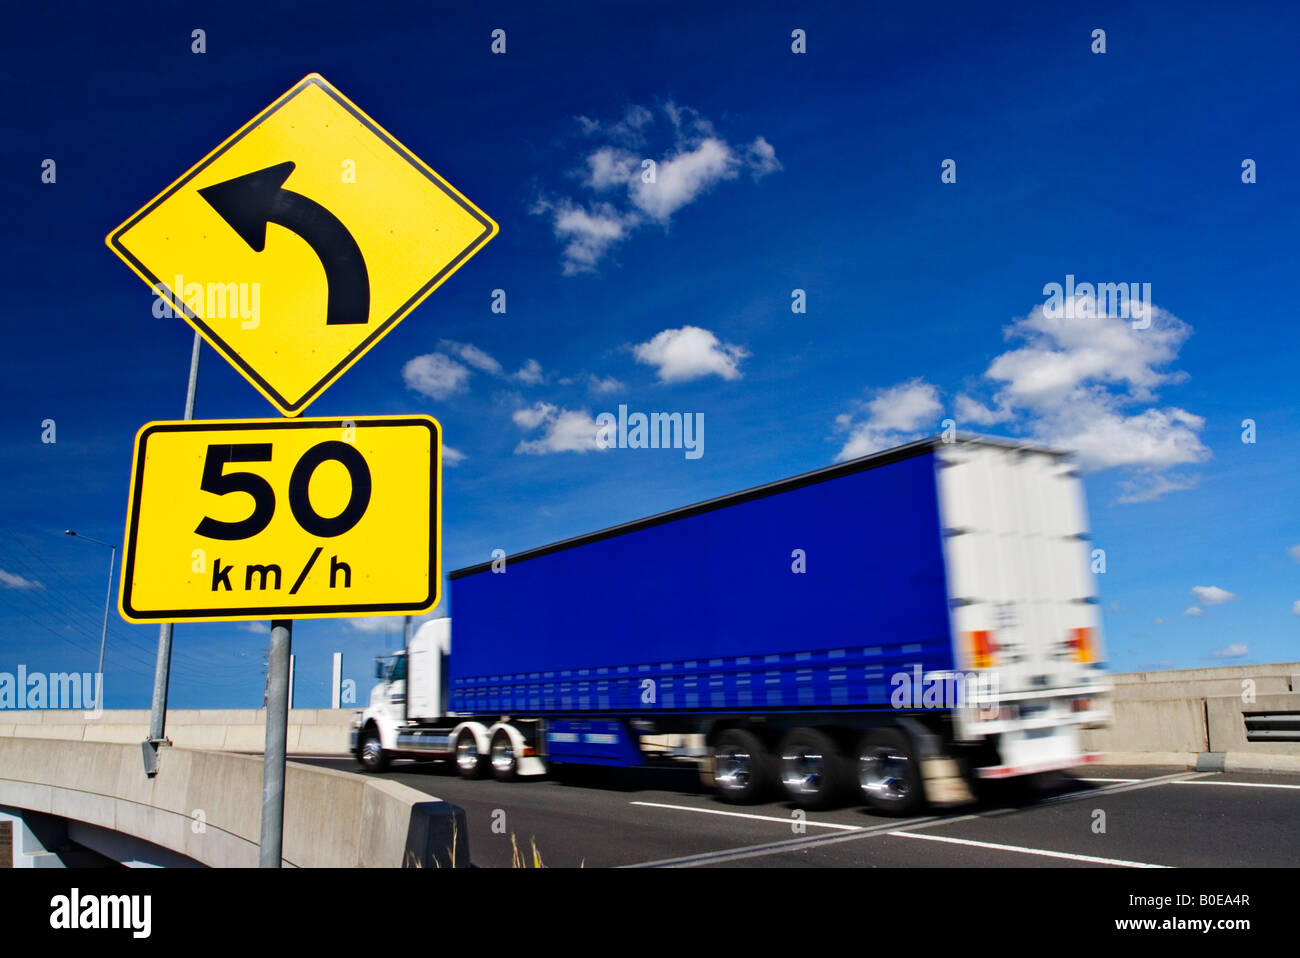 Transportation and Trucking / A  Transport Truck commutes on a Freeway. Stock Photo